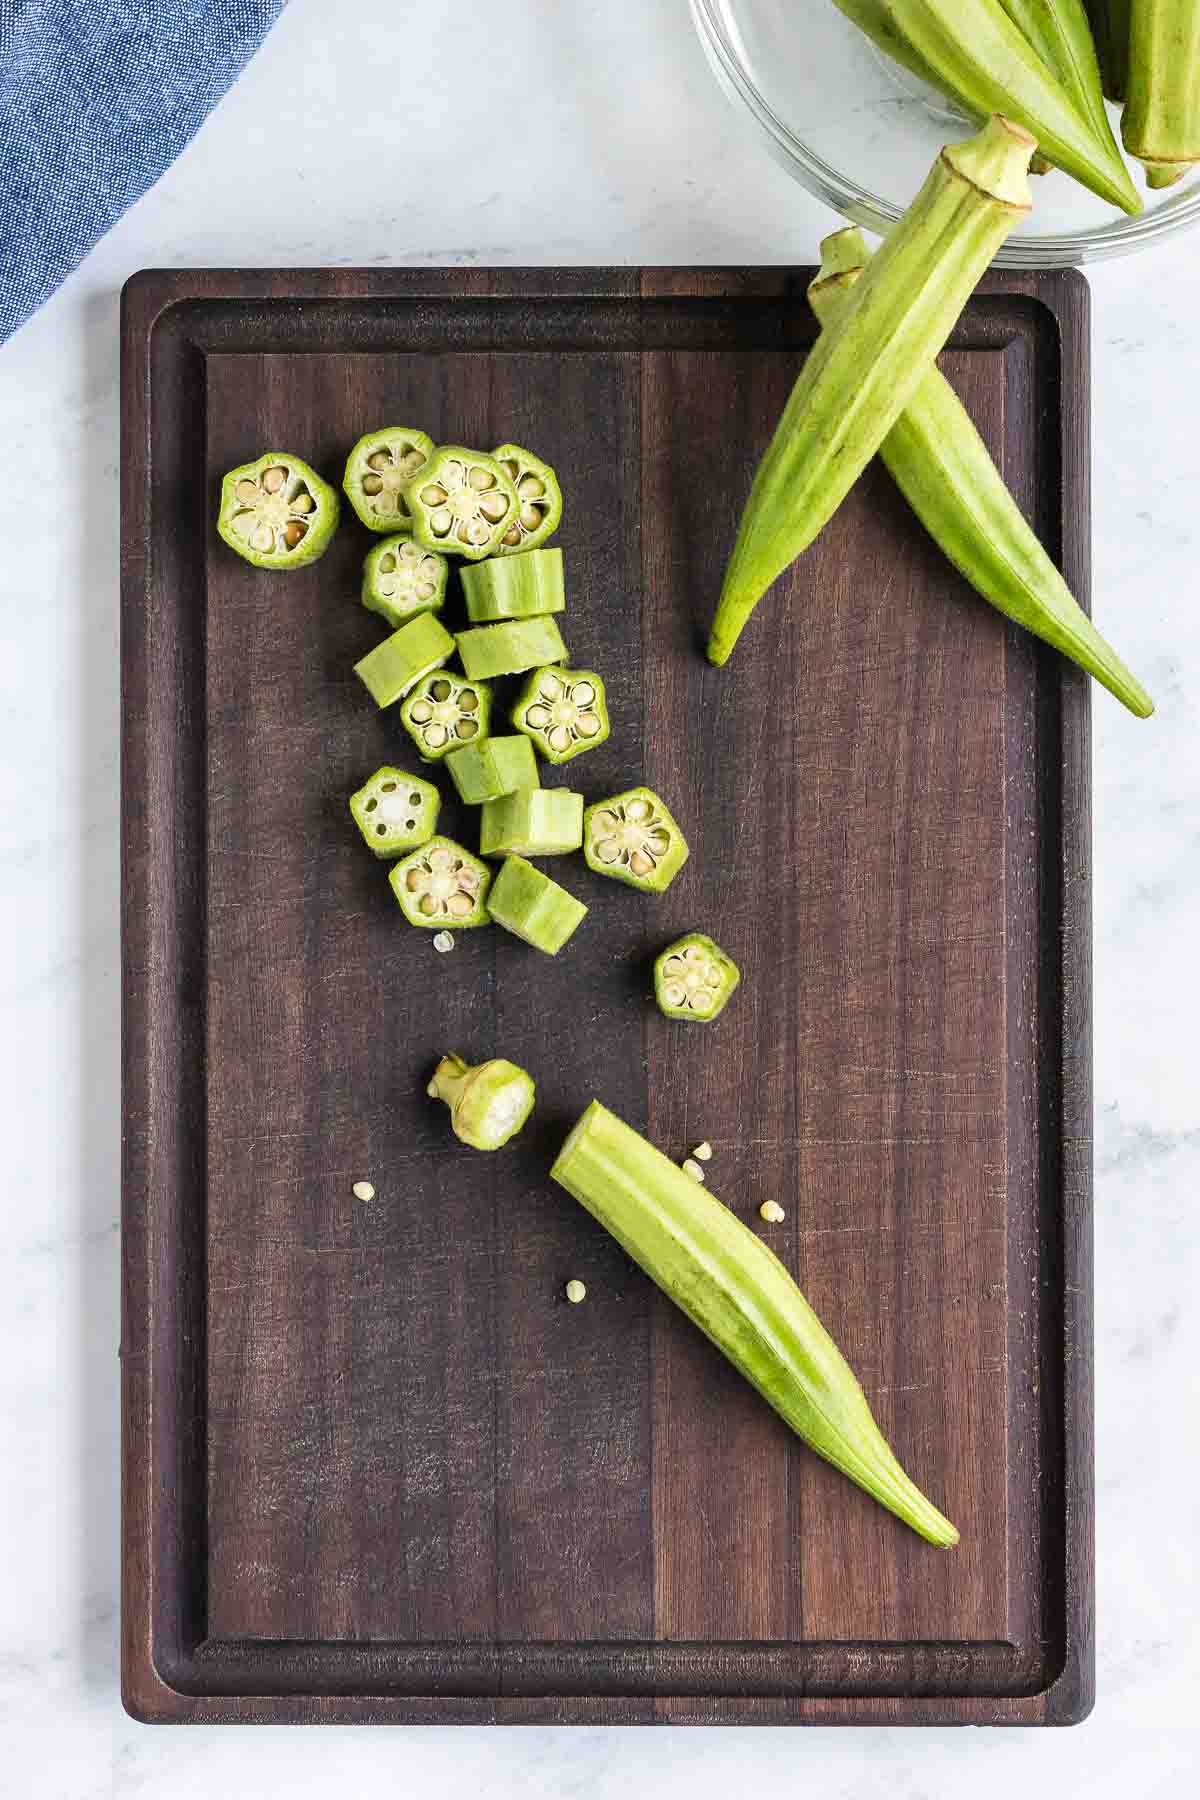 Sliced and whole okra on a dark wooden cutting board with a blue cloth in the background. Some okra pieces have seeds visible.